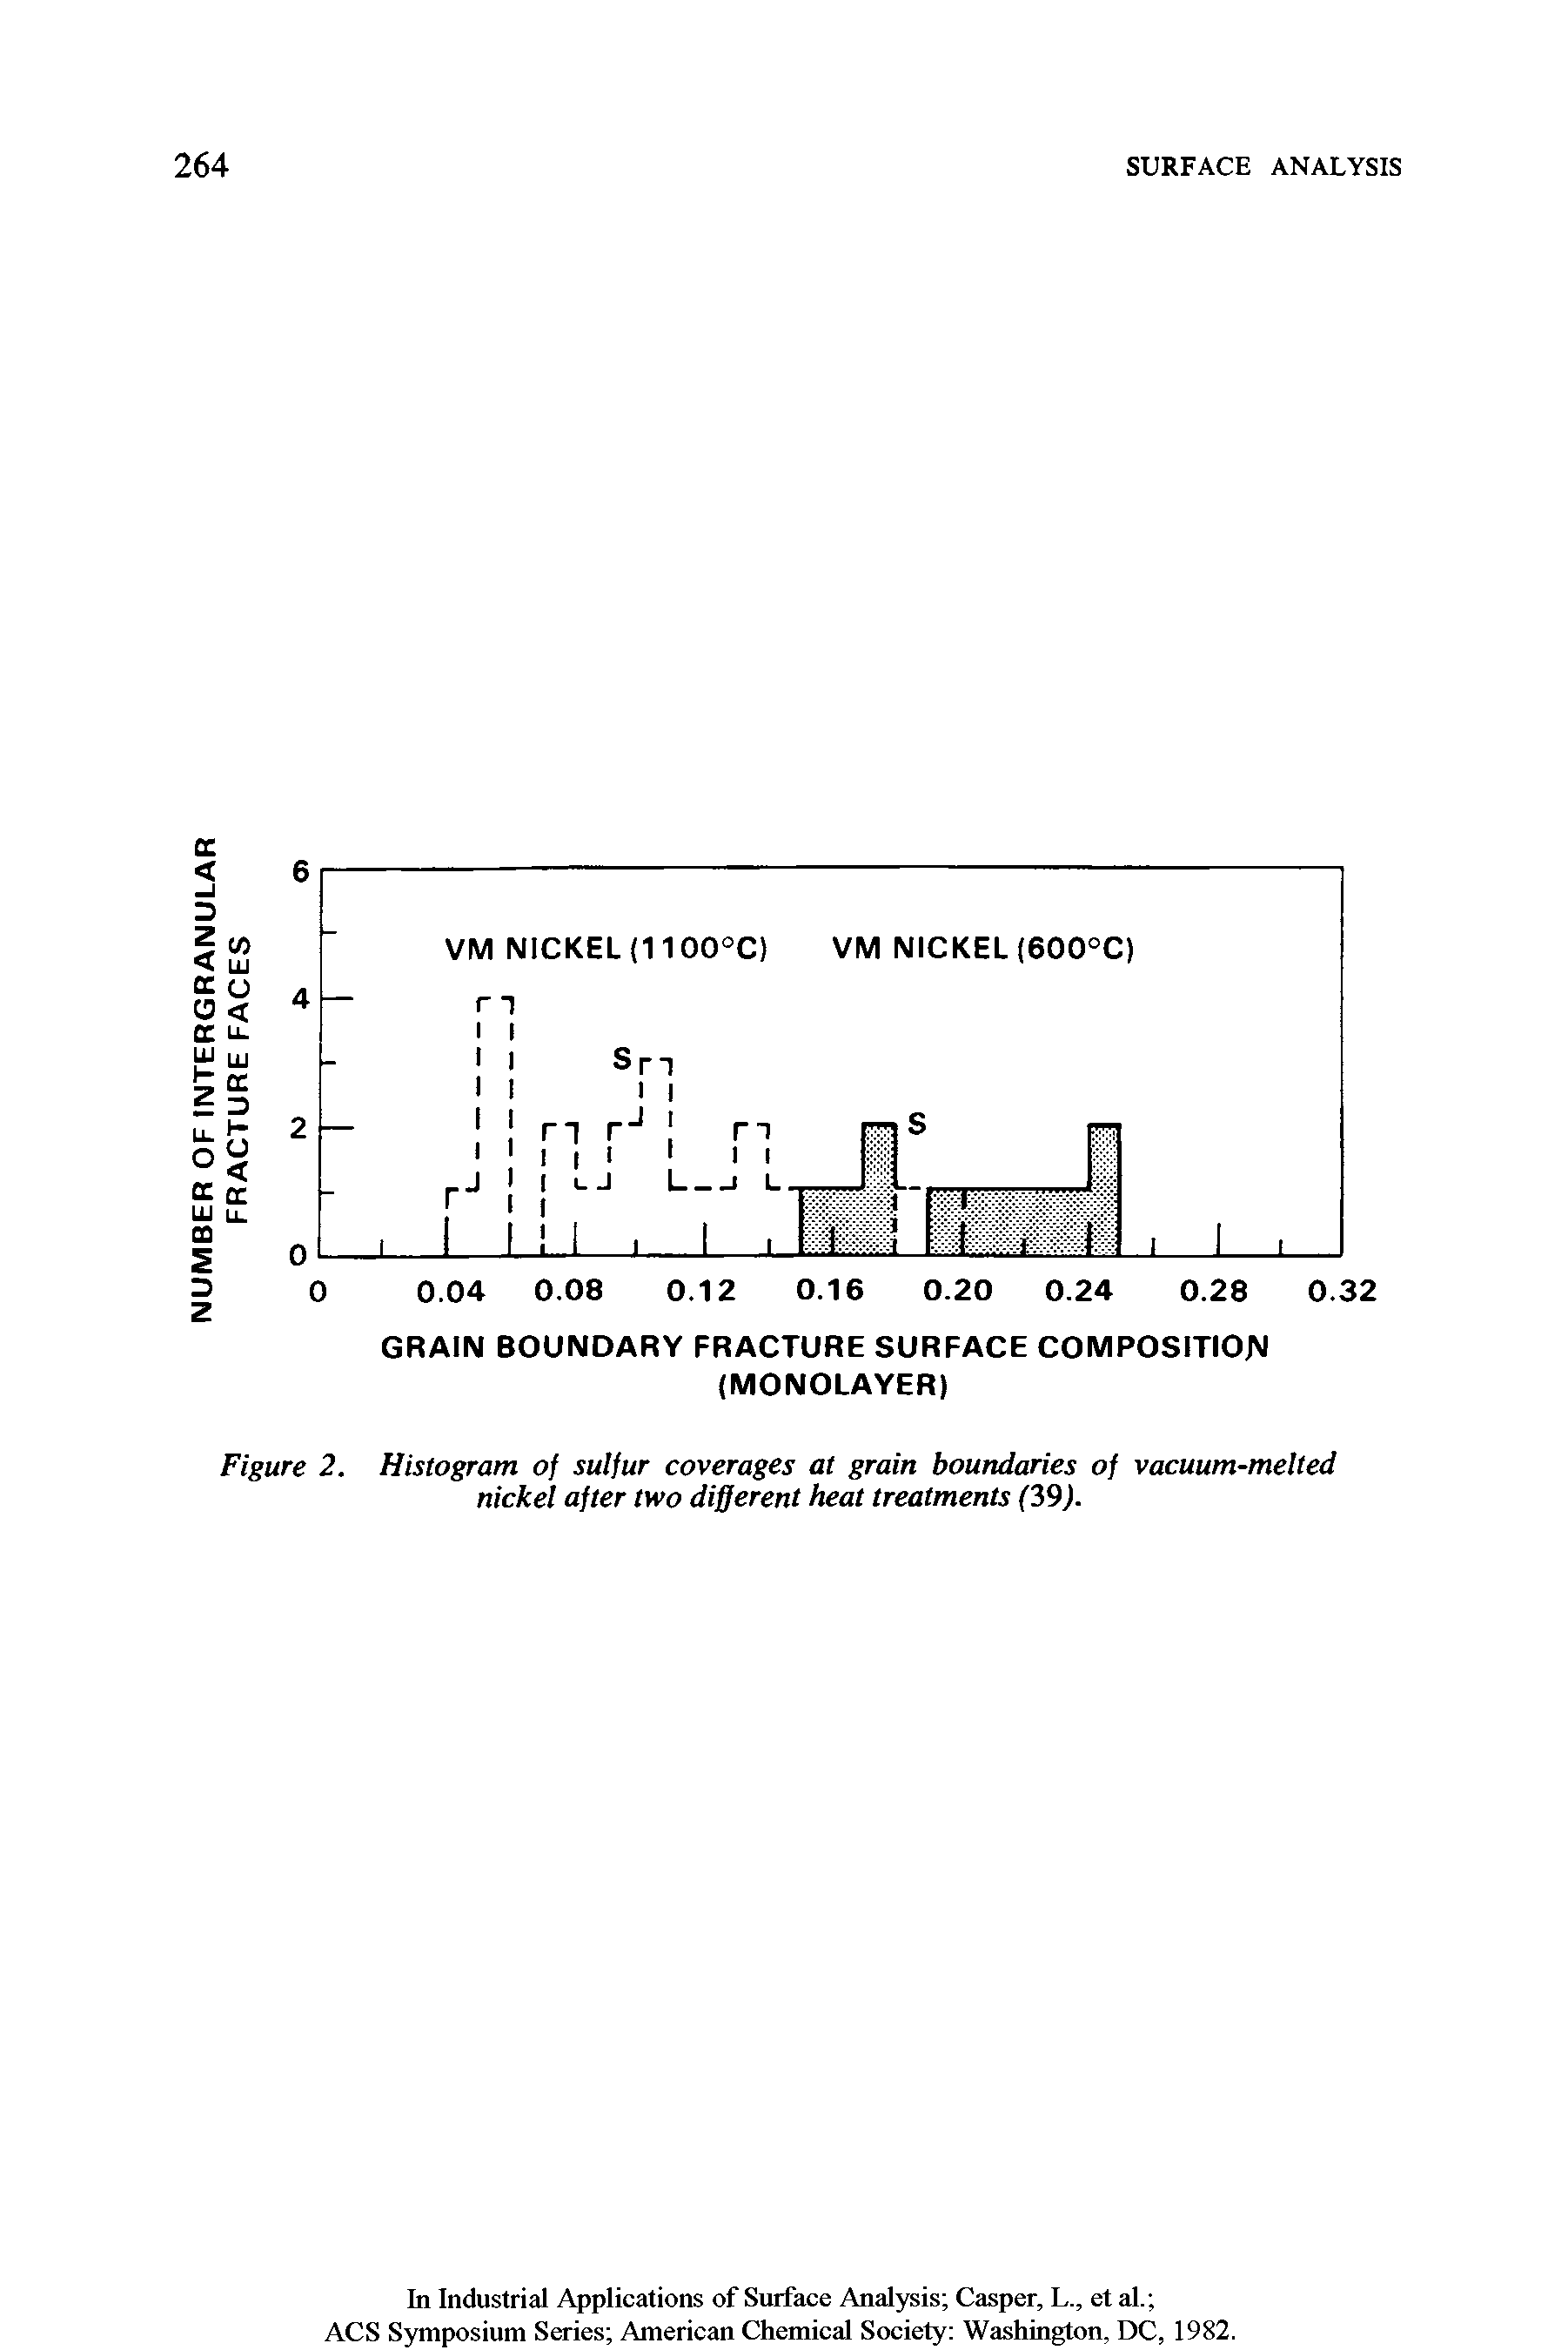 Figure 2. Histogram of sulfur coverages at grain boundaries of vacuum-melted nickel after two different heat treatments (39).